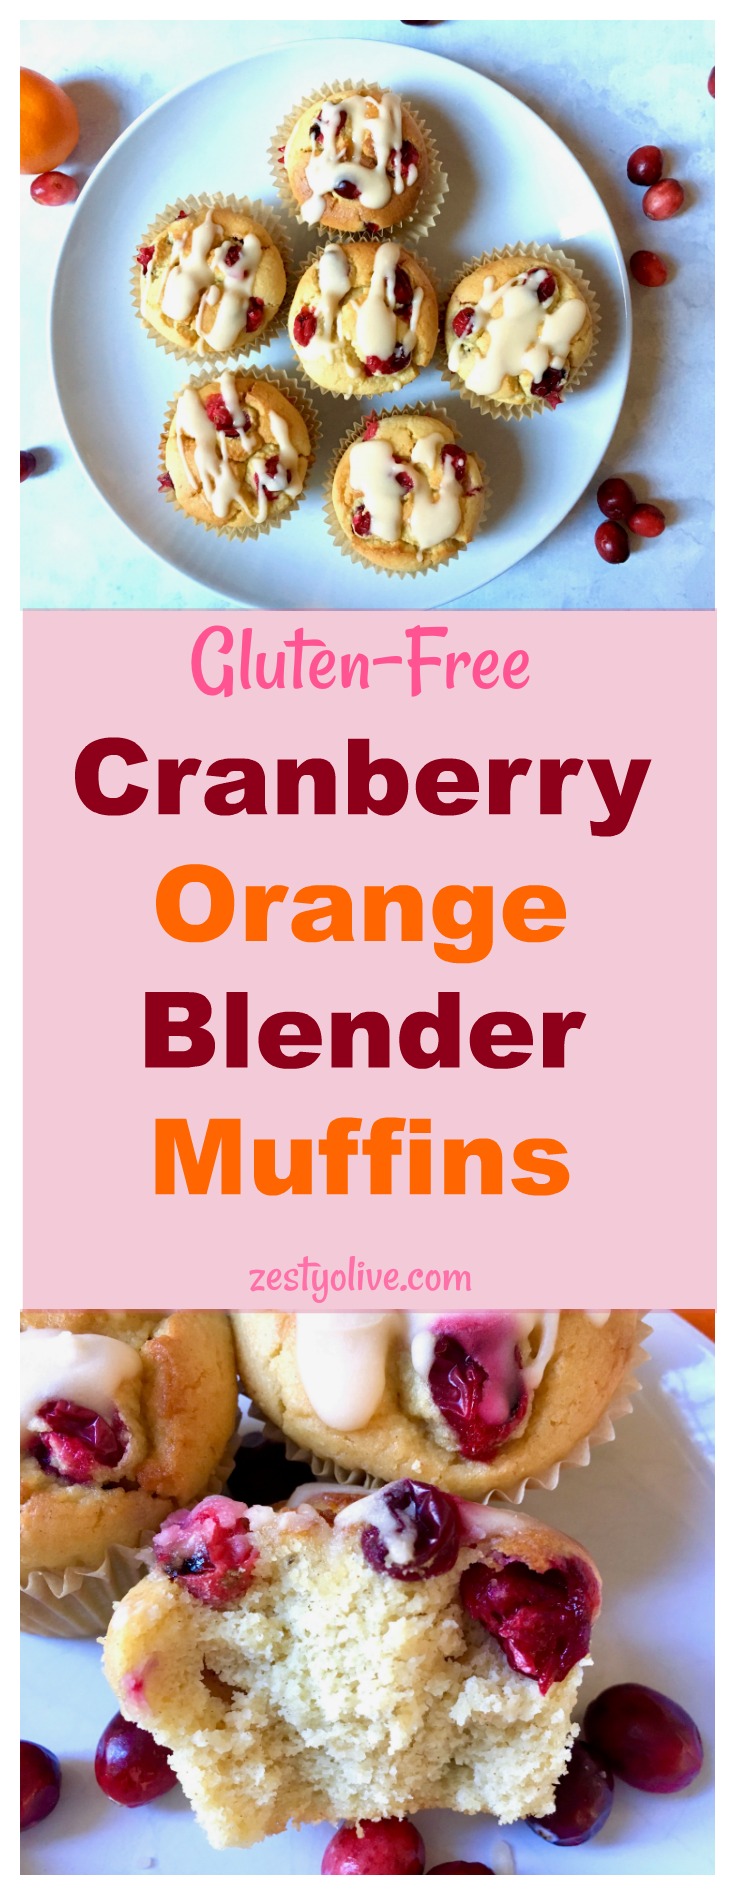 Gluten-Free Cranberry Orange Blender Muffins are an easy and healthy breakfast option or a delicious afternoon snack.